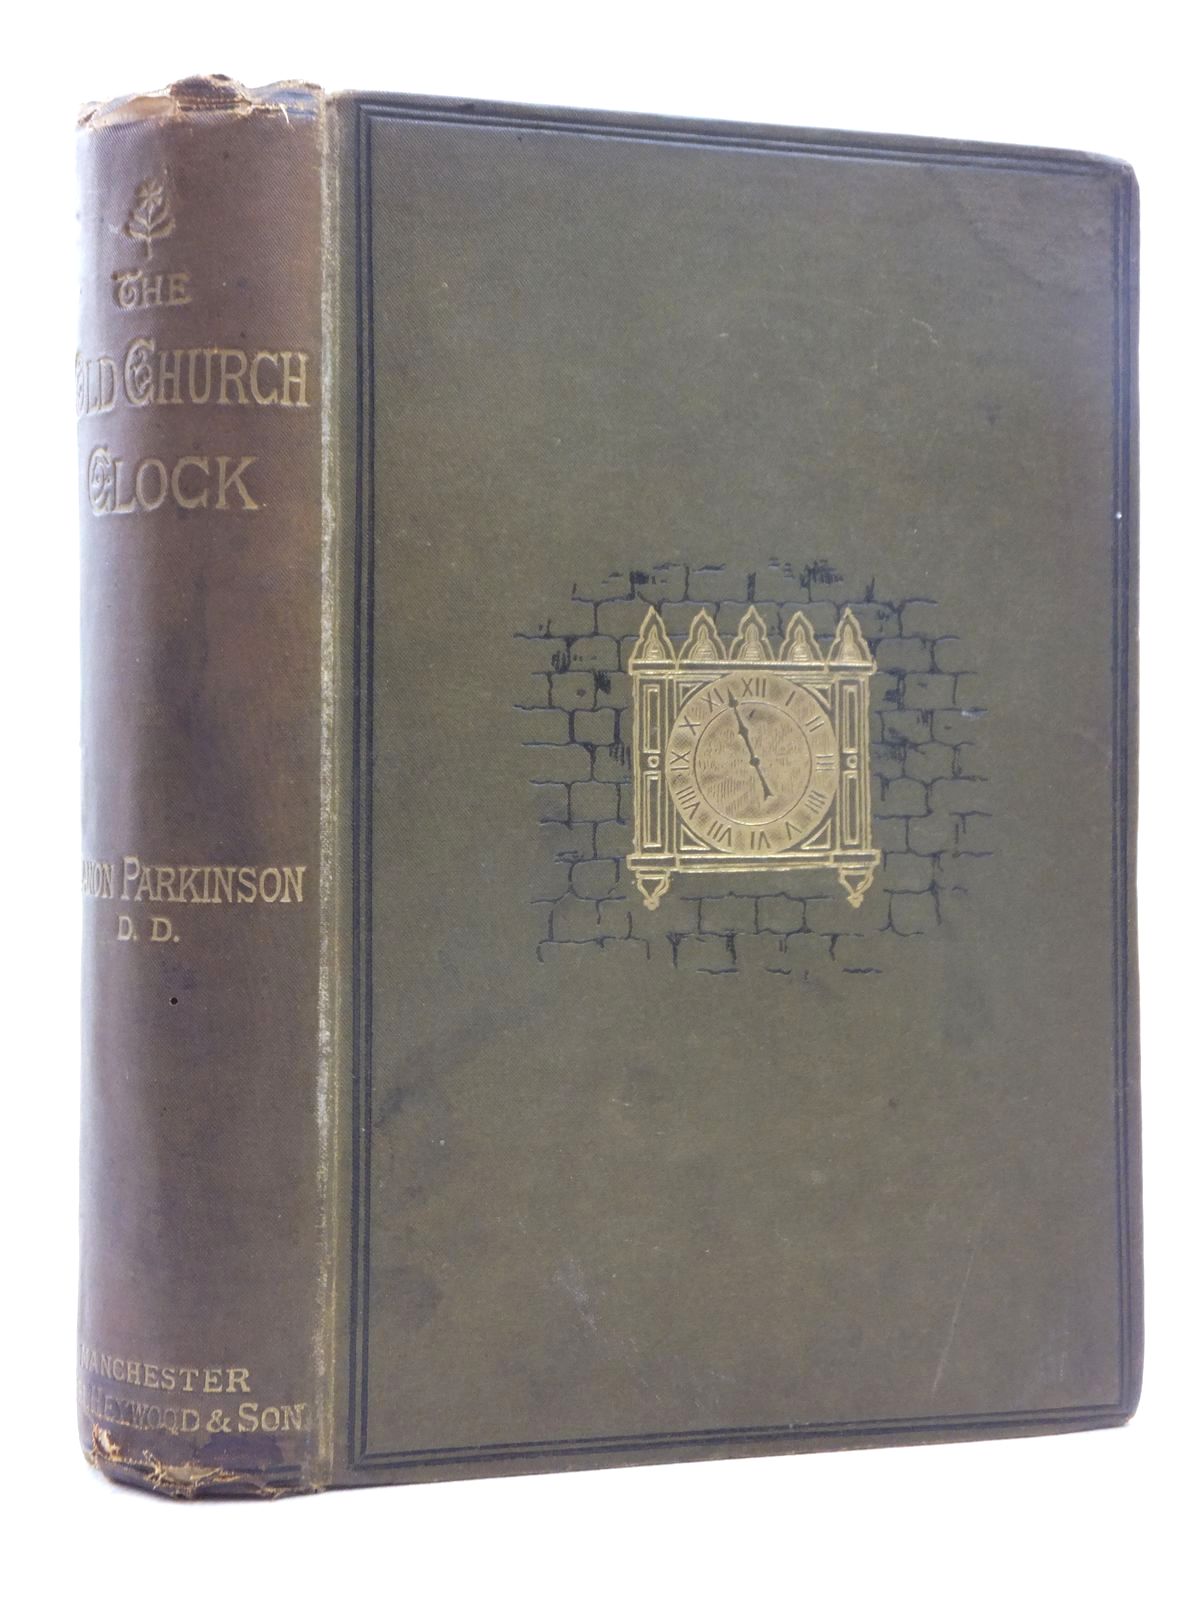 Photo of THE OLD CHURCH CLOCK written by Parkinson, Richard
Evans, John published by Simpkin, Marshall & Co., Abel Heywood & Son Ltd. (STOCK CODE: 1814826)  for sale by Stella & Rose's Books